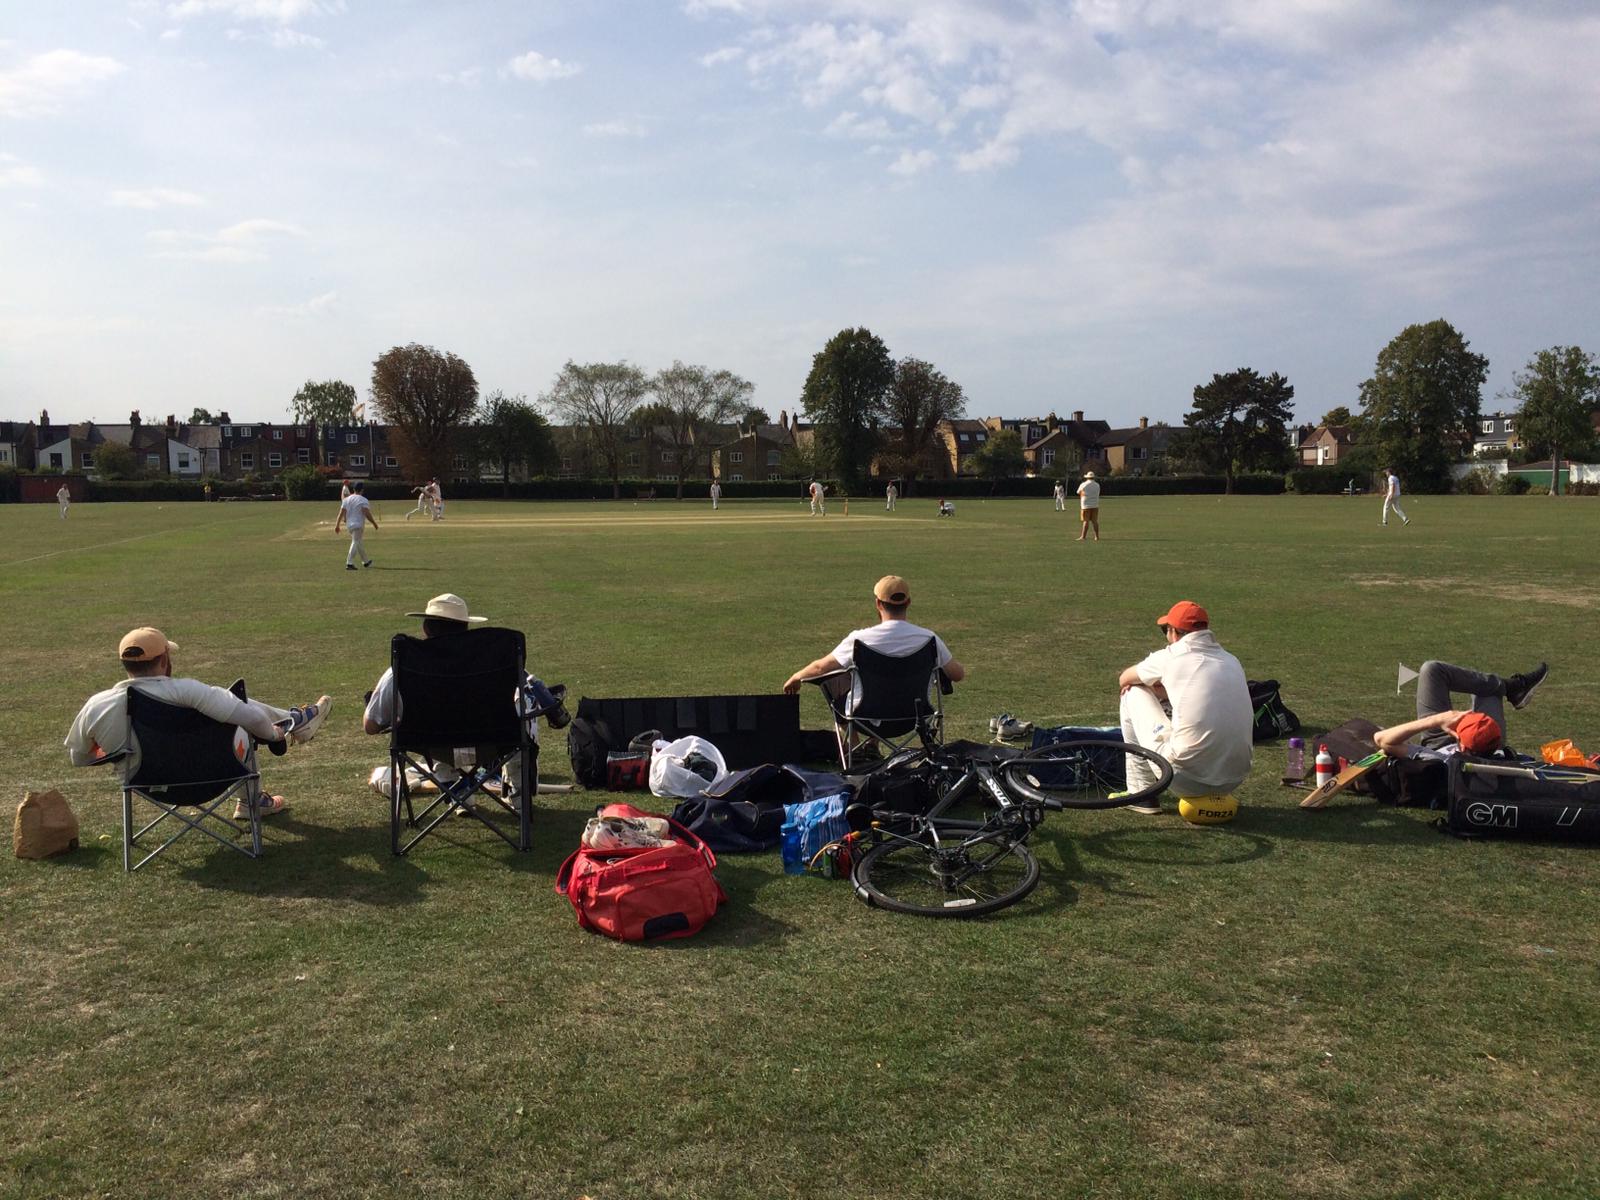 King’s Road fell whey short of a win as the Butterlords completed a four-wicket victory.